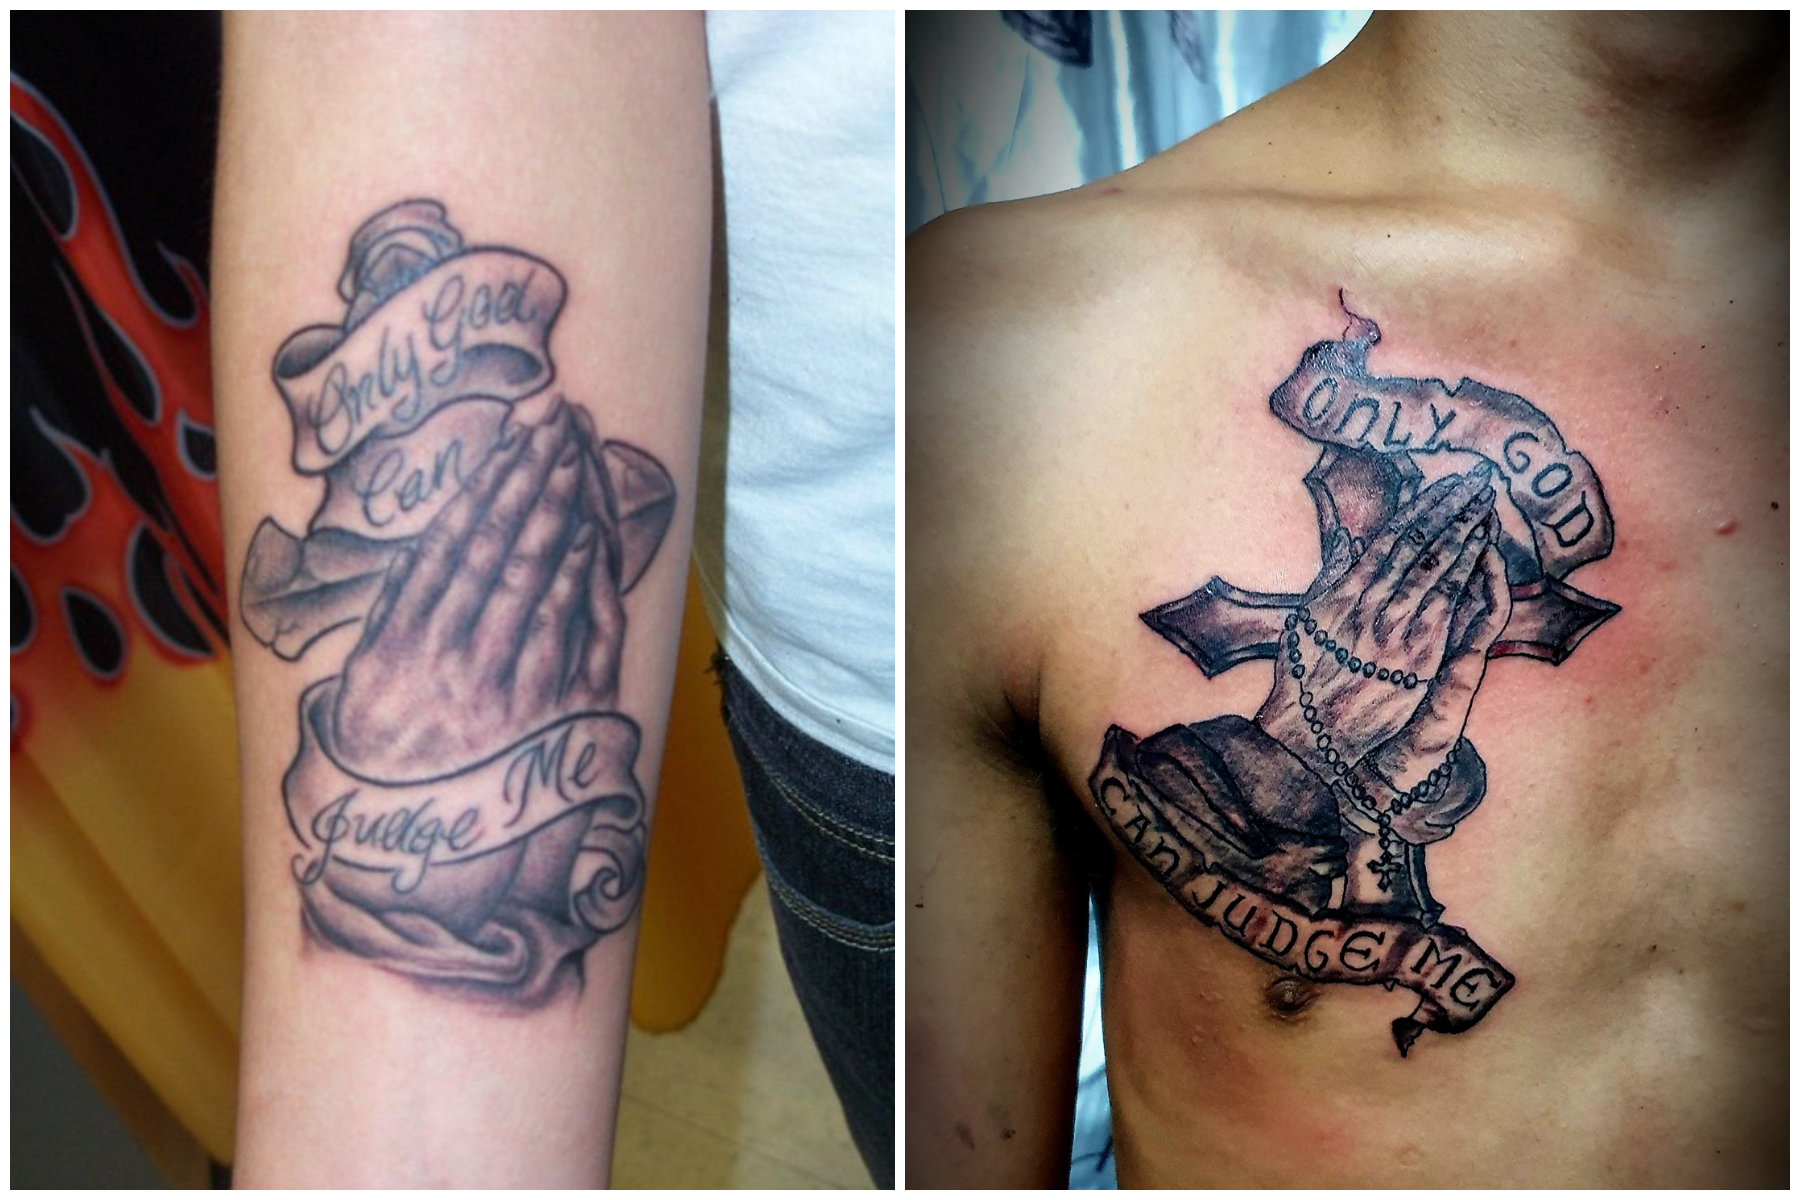 Ugliest Tattoos - only god can judge me - Bad tattoos of horrible fail  situations that are permanent and on your body. - funny tattoos | bad  tattoos | horrible tattoos | tattoo fail - Cheezburger